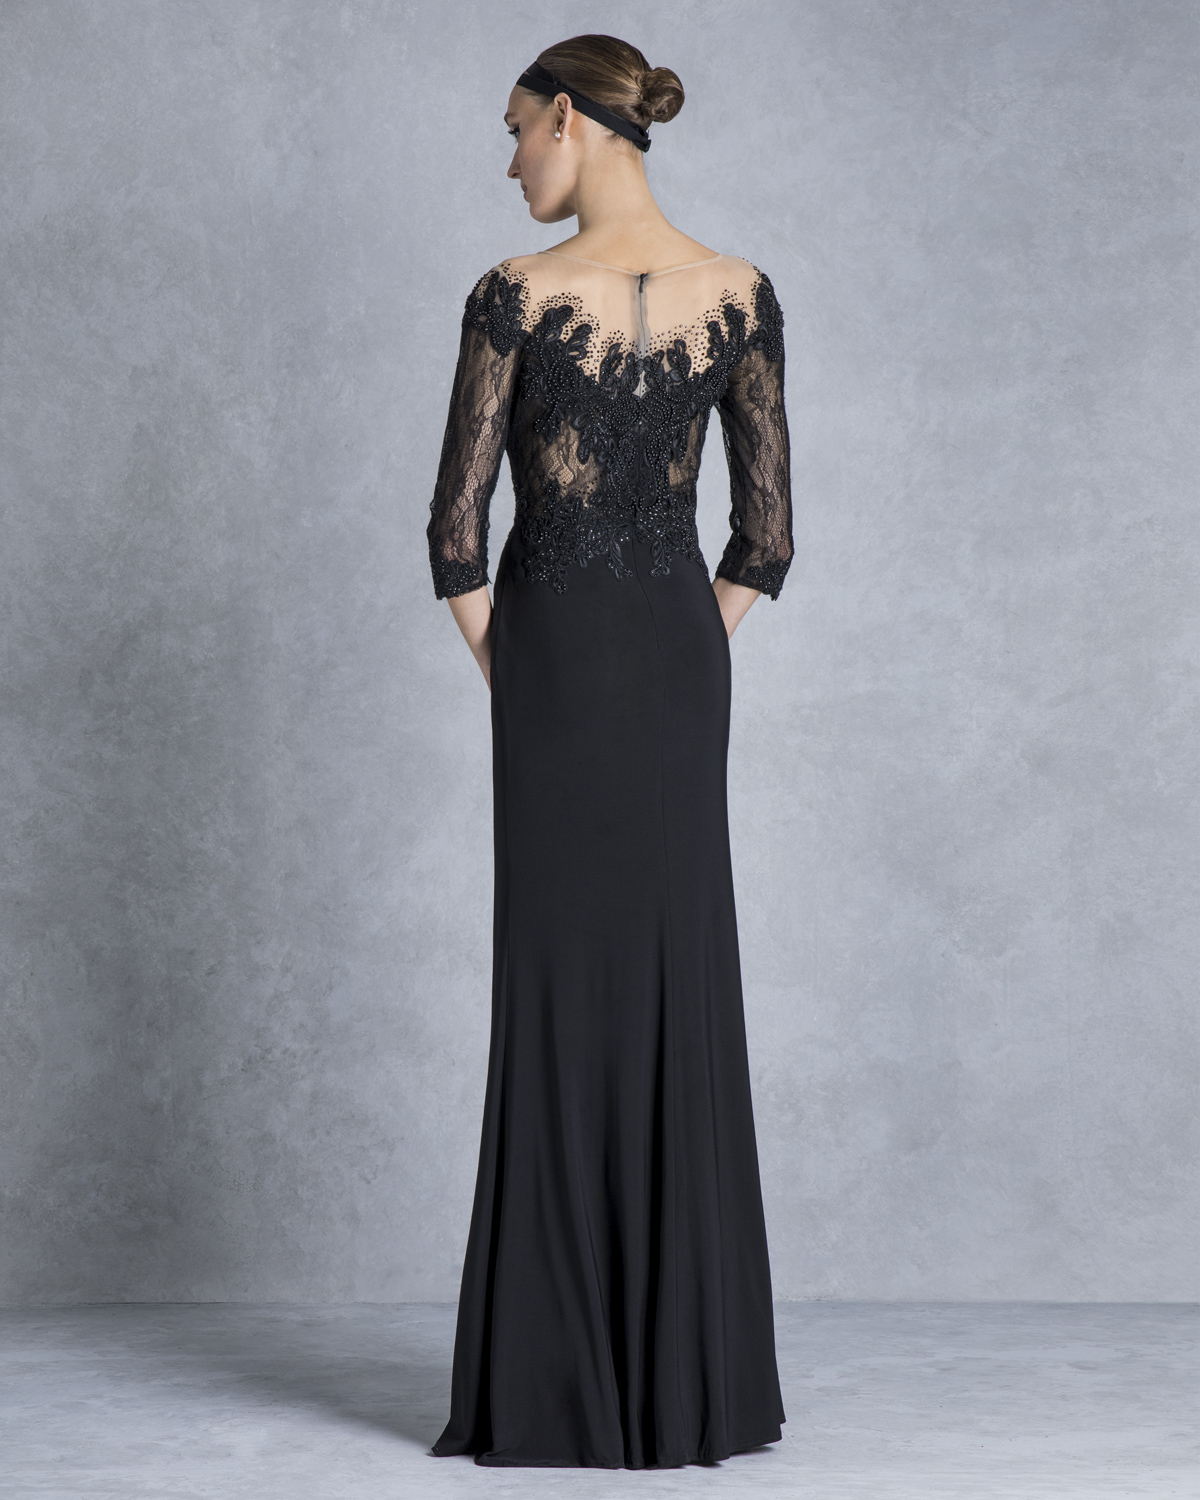 Long jersey evening dress with beaded top and lace sleeves